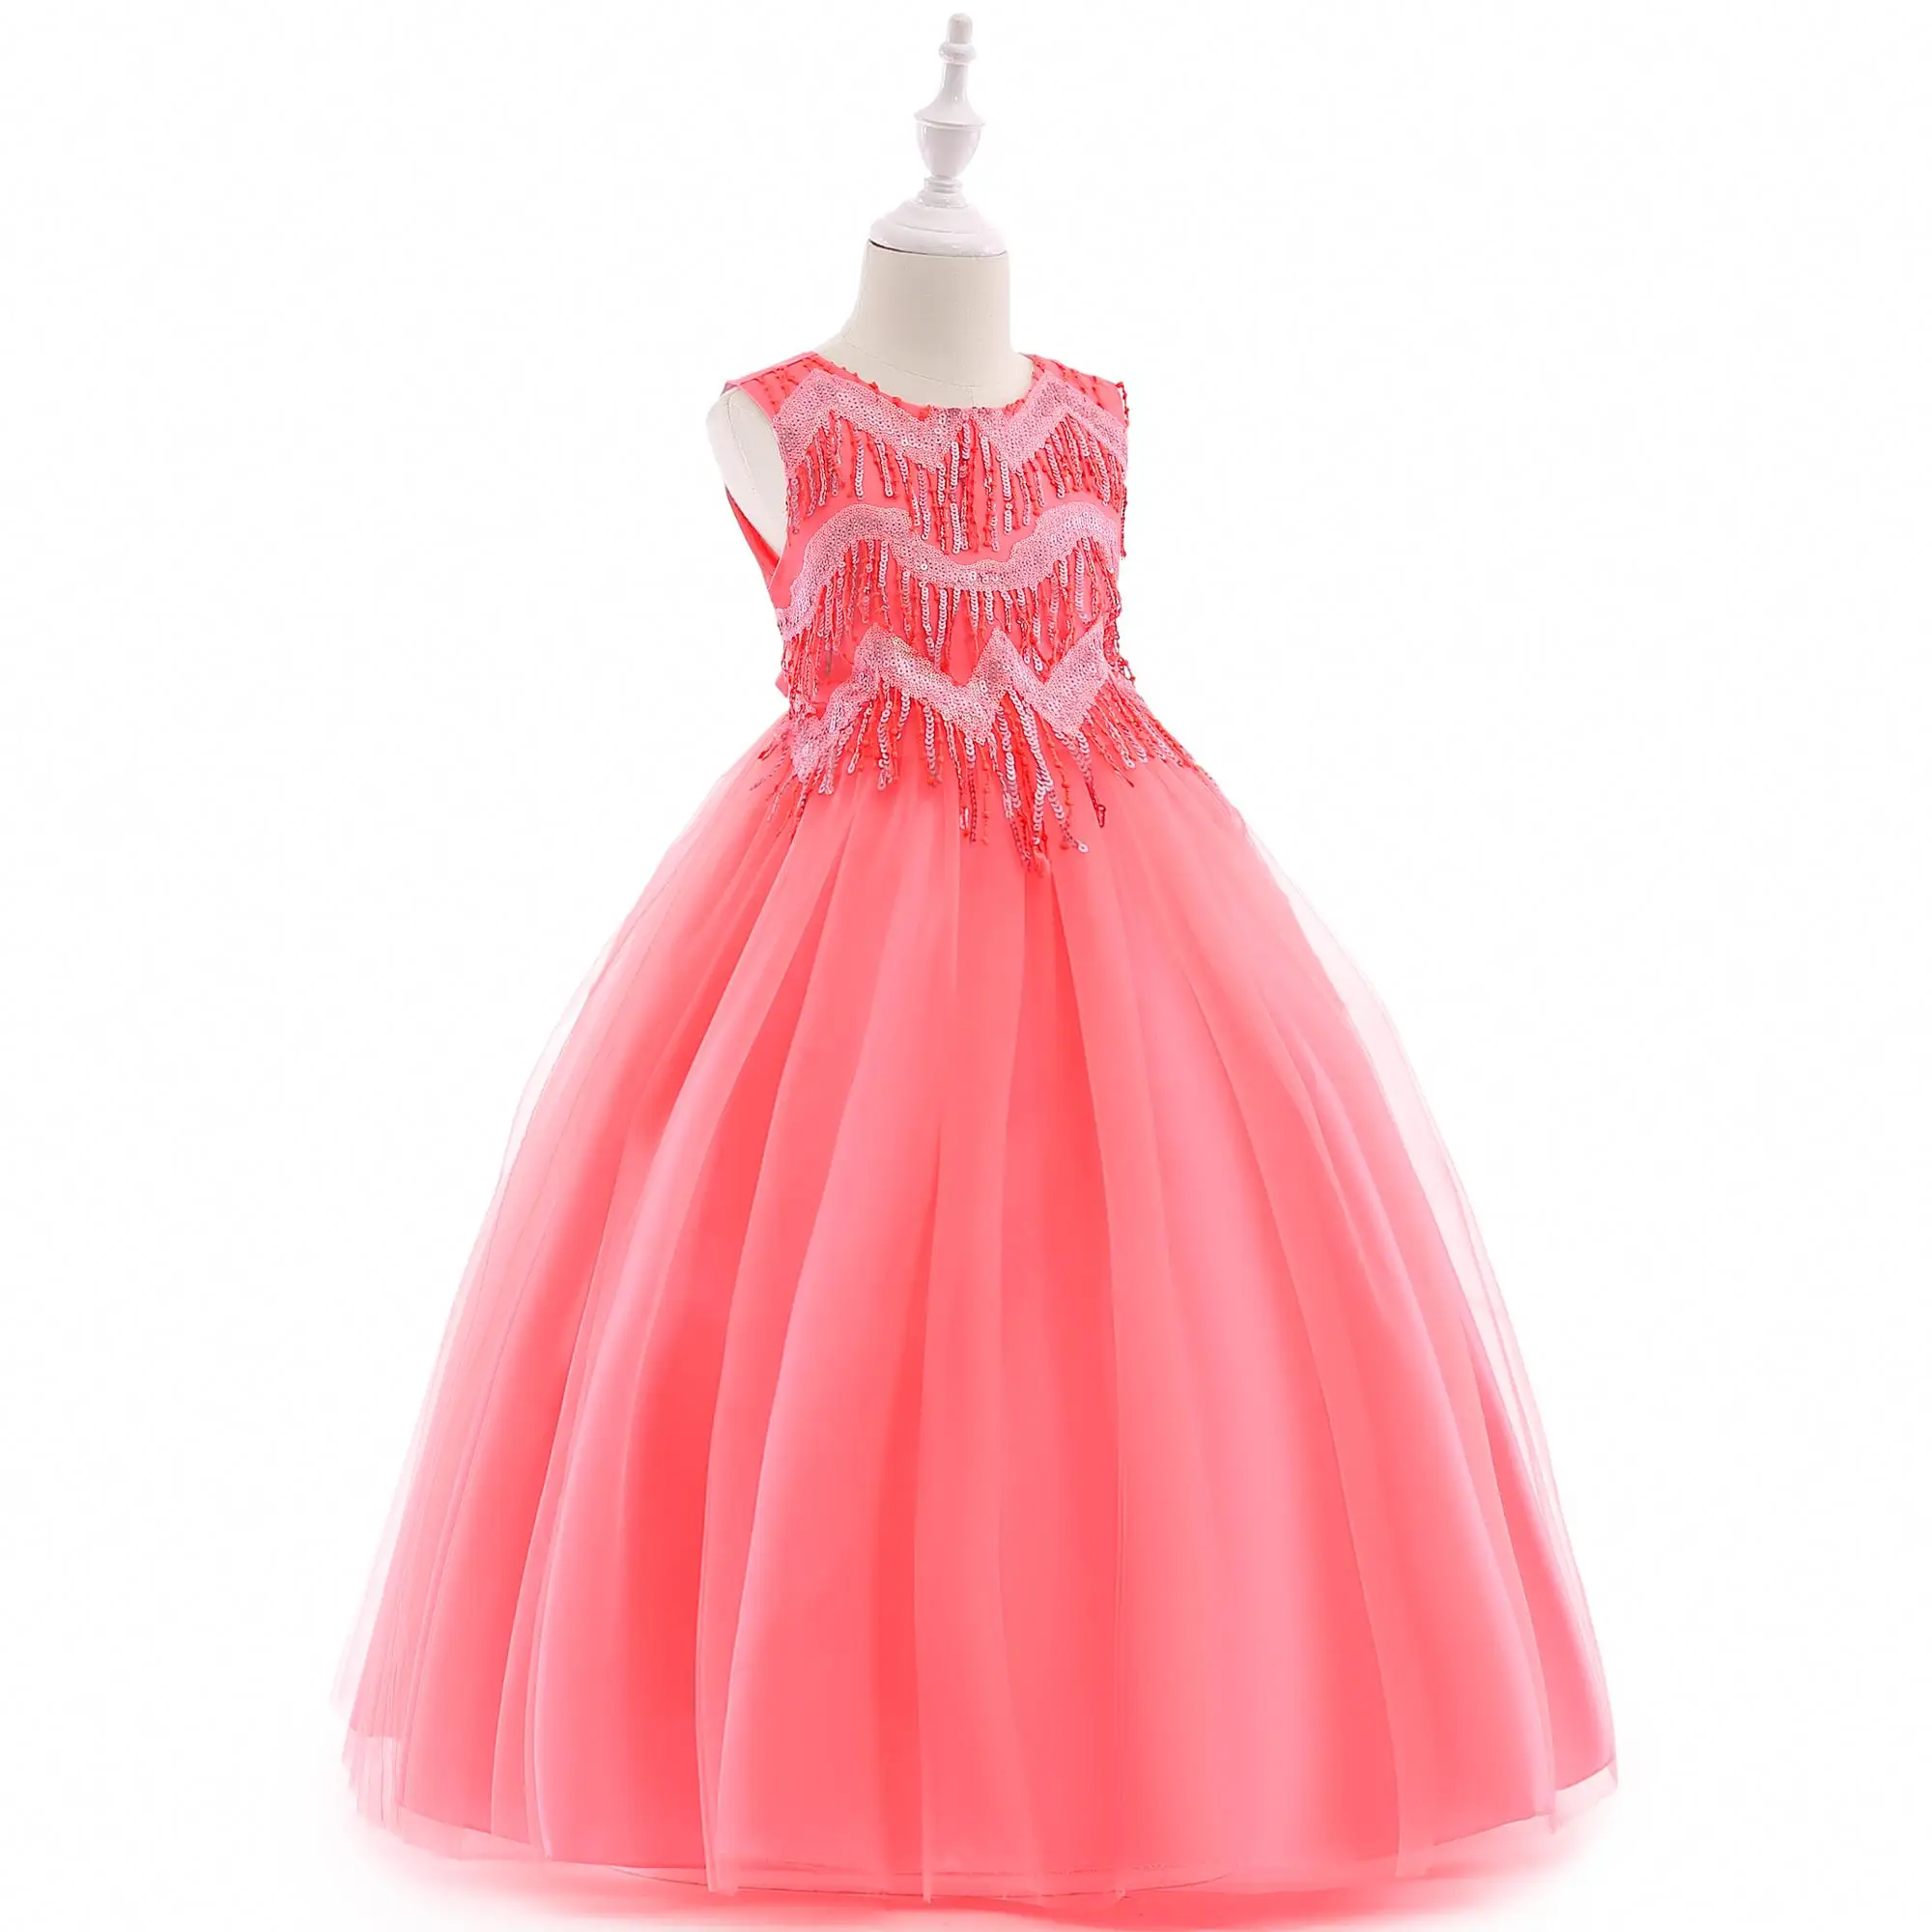 

Summer Baby Frock Designs Girls Boutique Clothing Long Party Wear Kids Girls Smoking Dresses LP-206, As picture